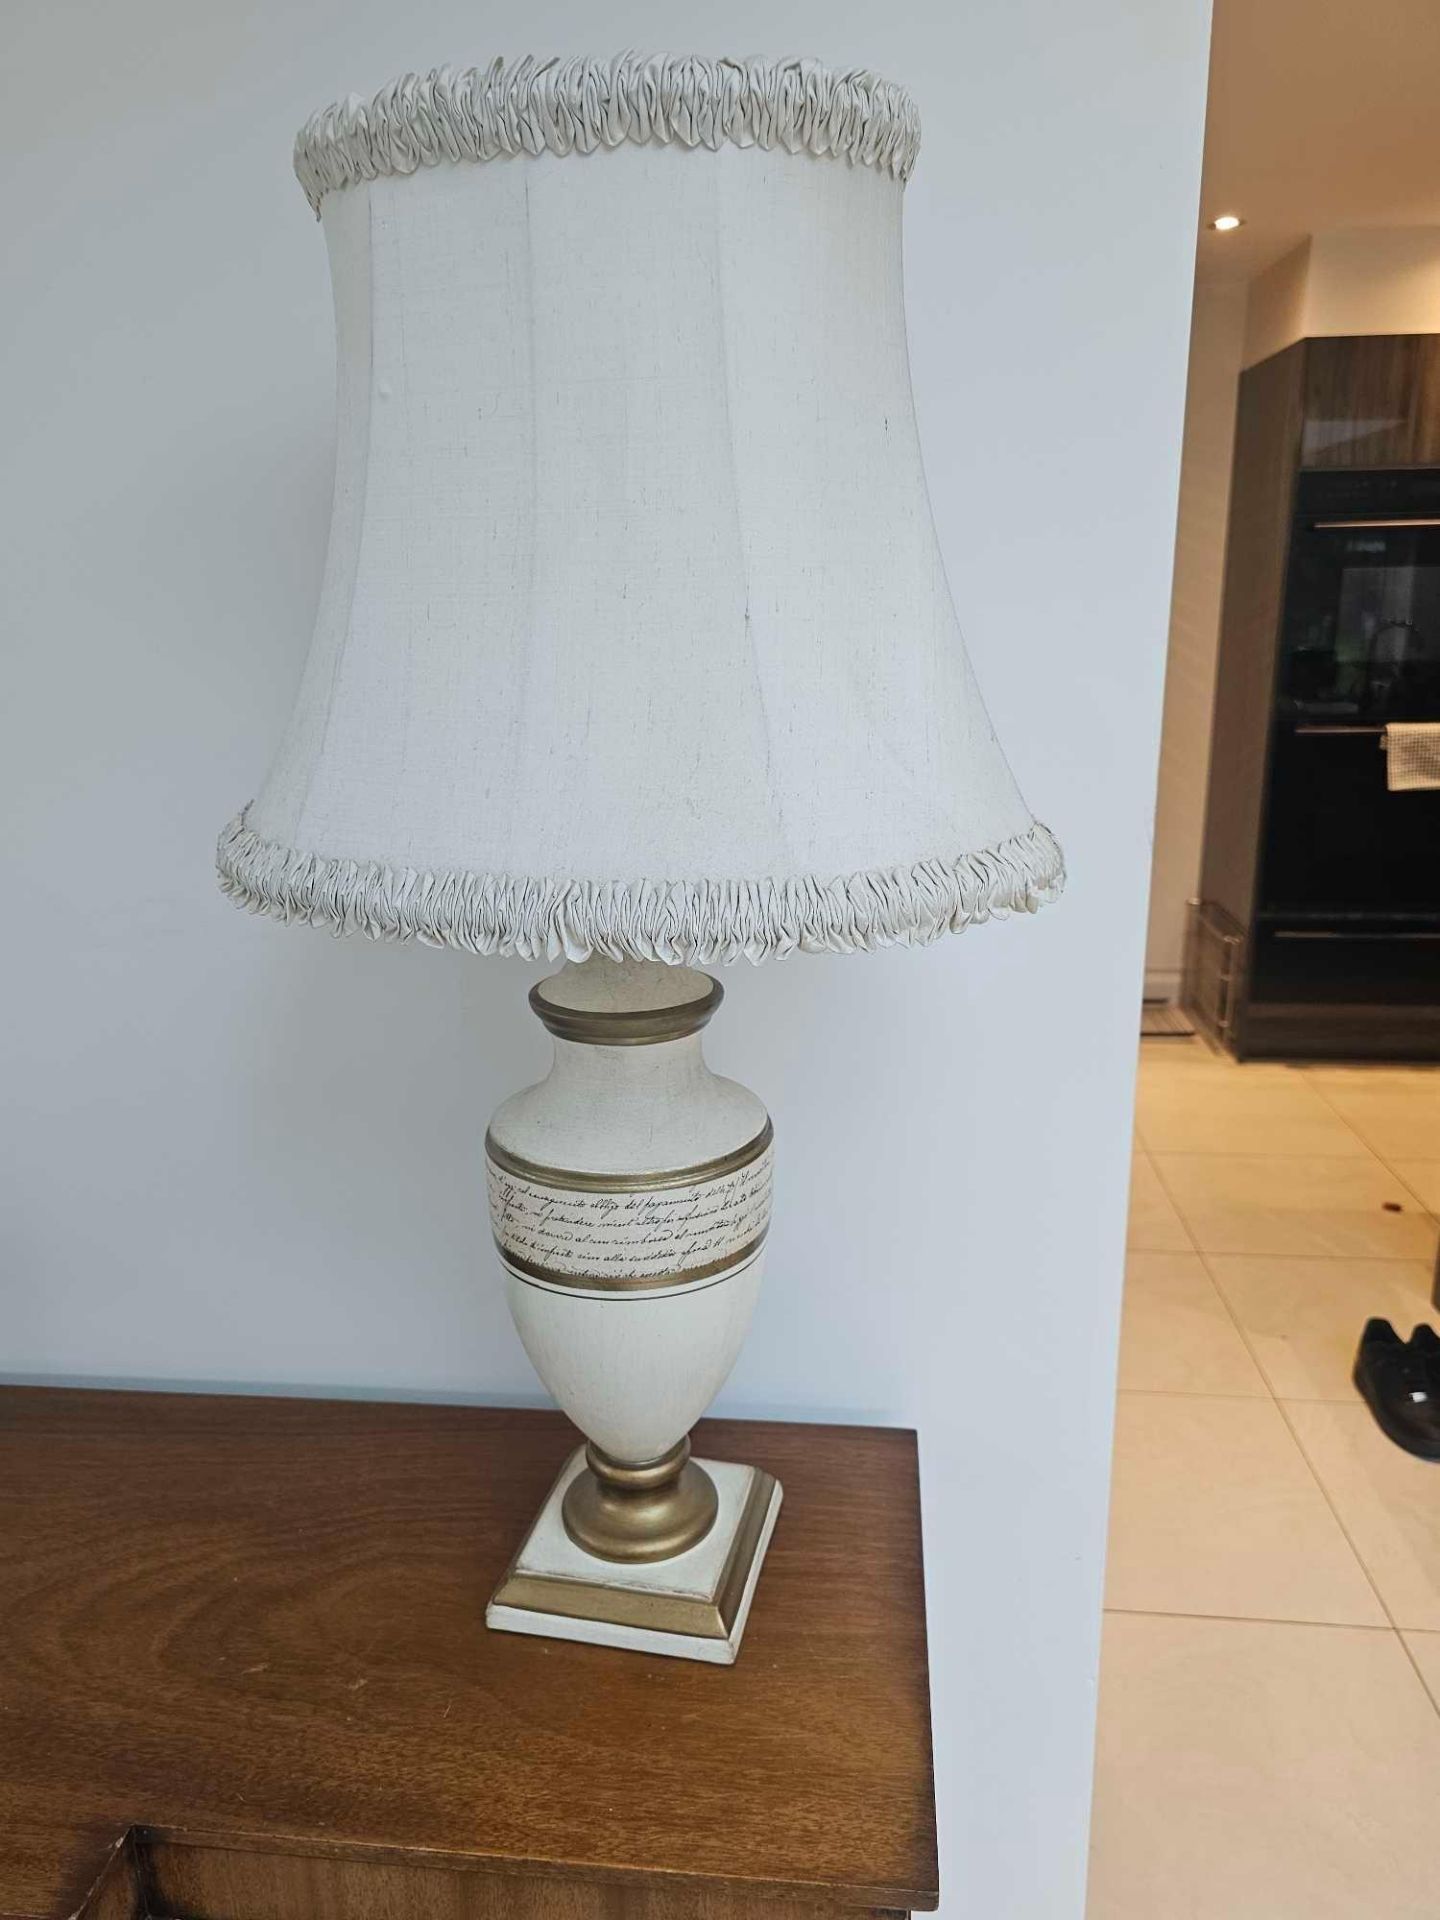 A Pair Of Ceramic Classic Urn Form Table Lamps Cream & Gold Pattern Square Base With Shades 76cm - Image 4 of 4